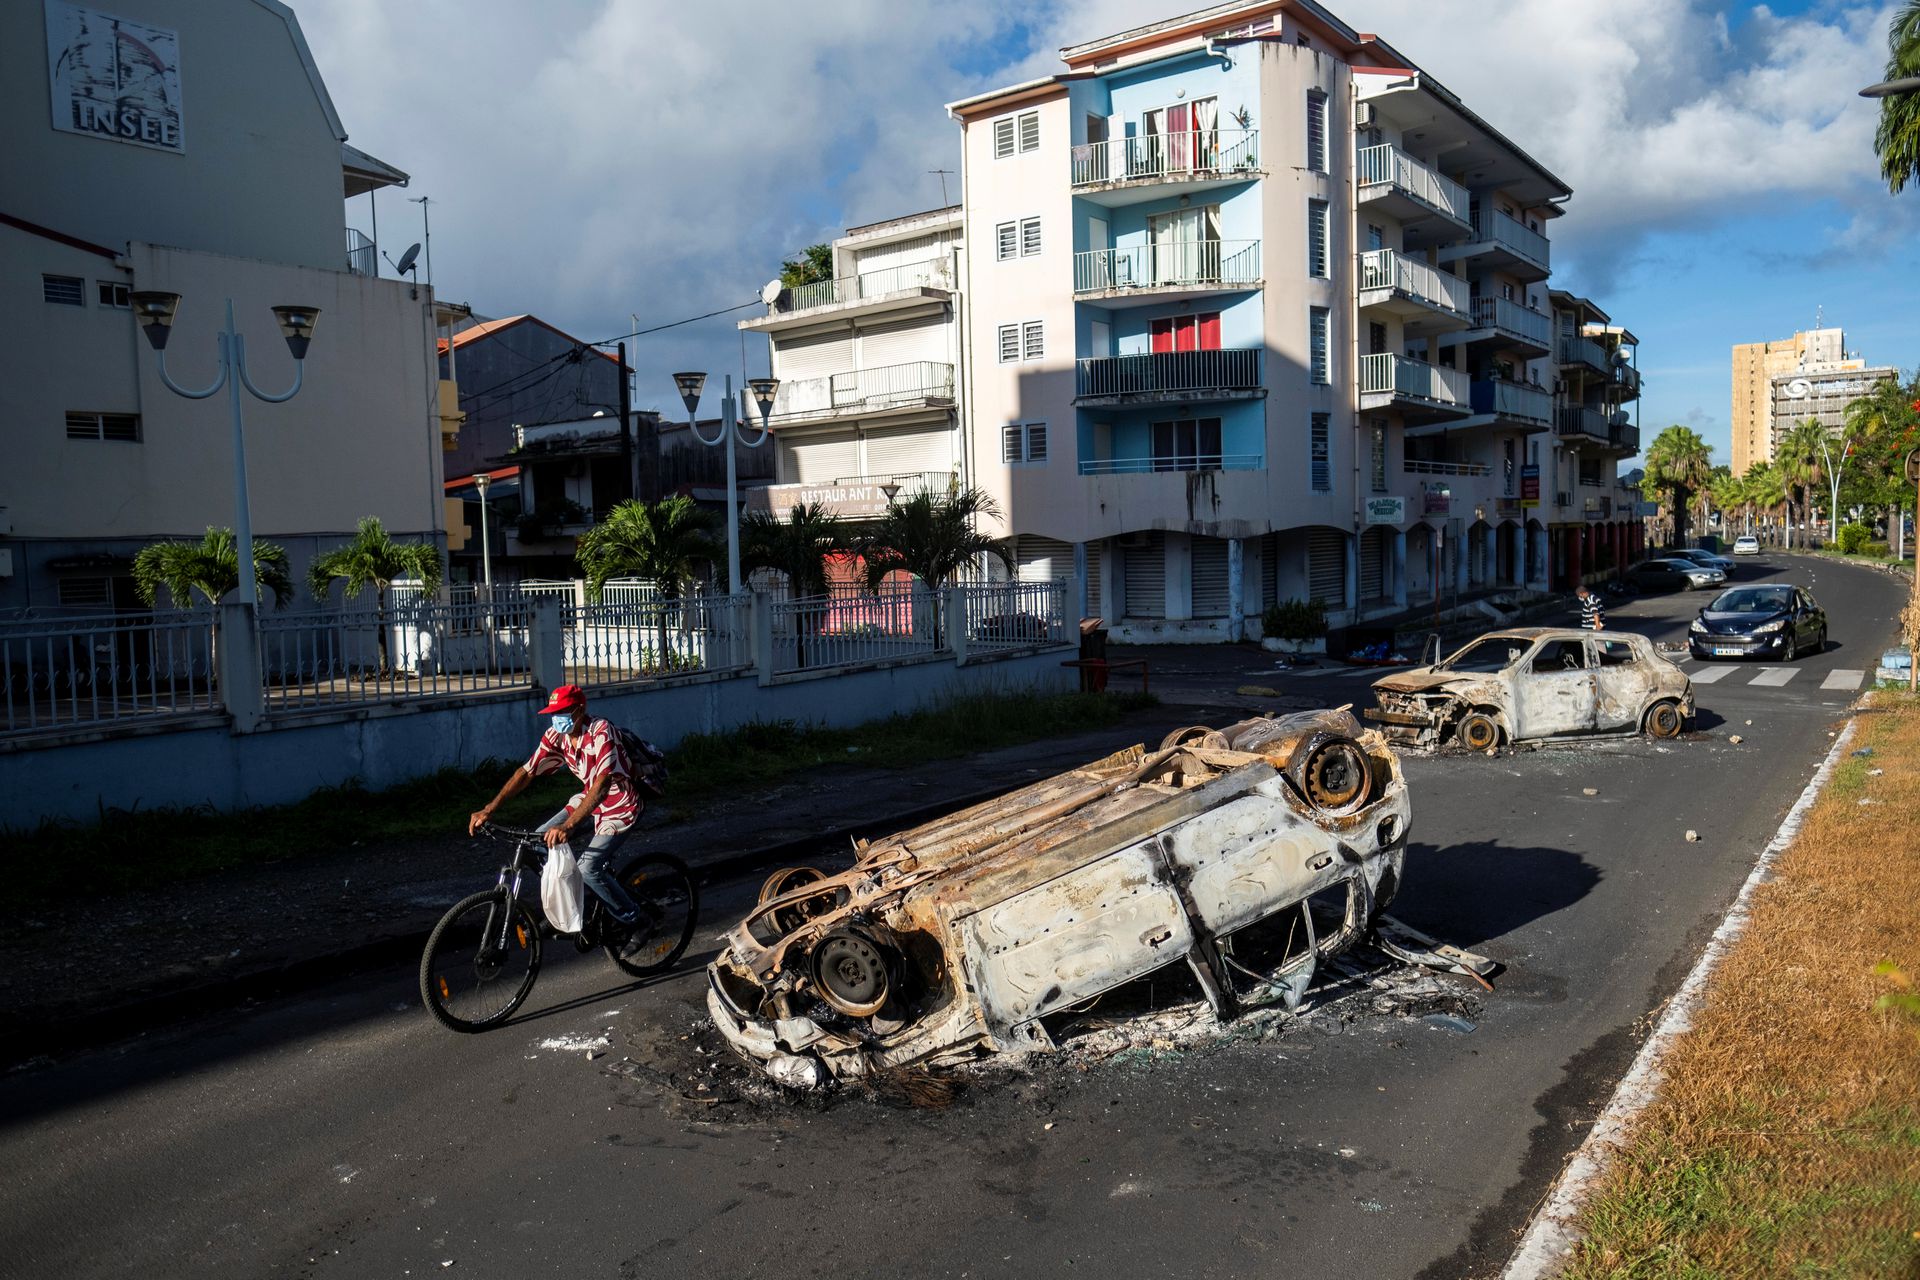 Rabid Anti-Vaxxers Throw Rocks At Police In Latest COVID Unrest On Guadeloupe